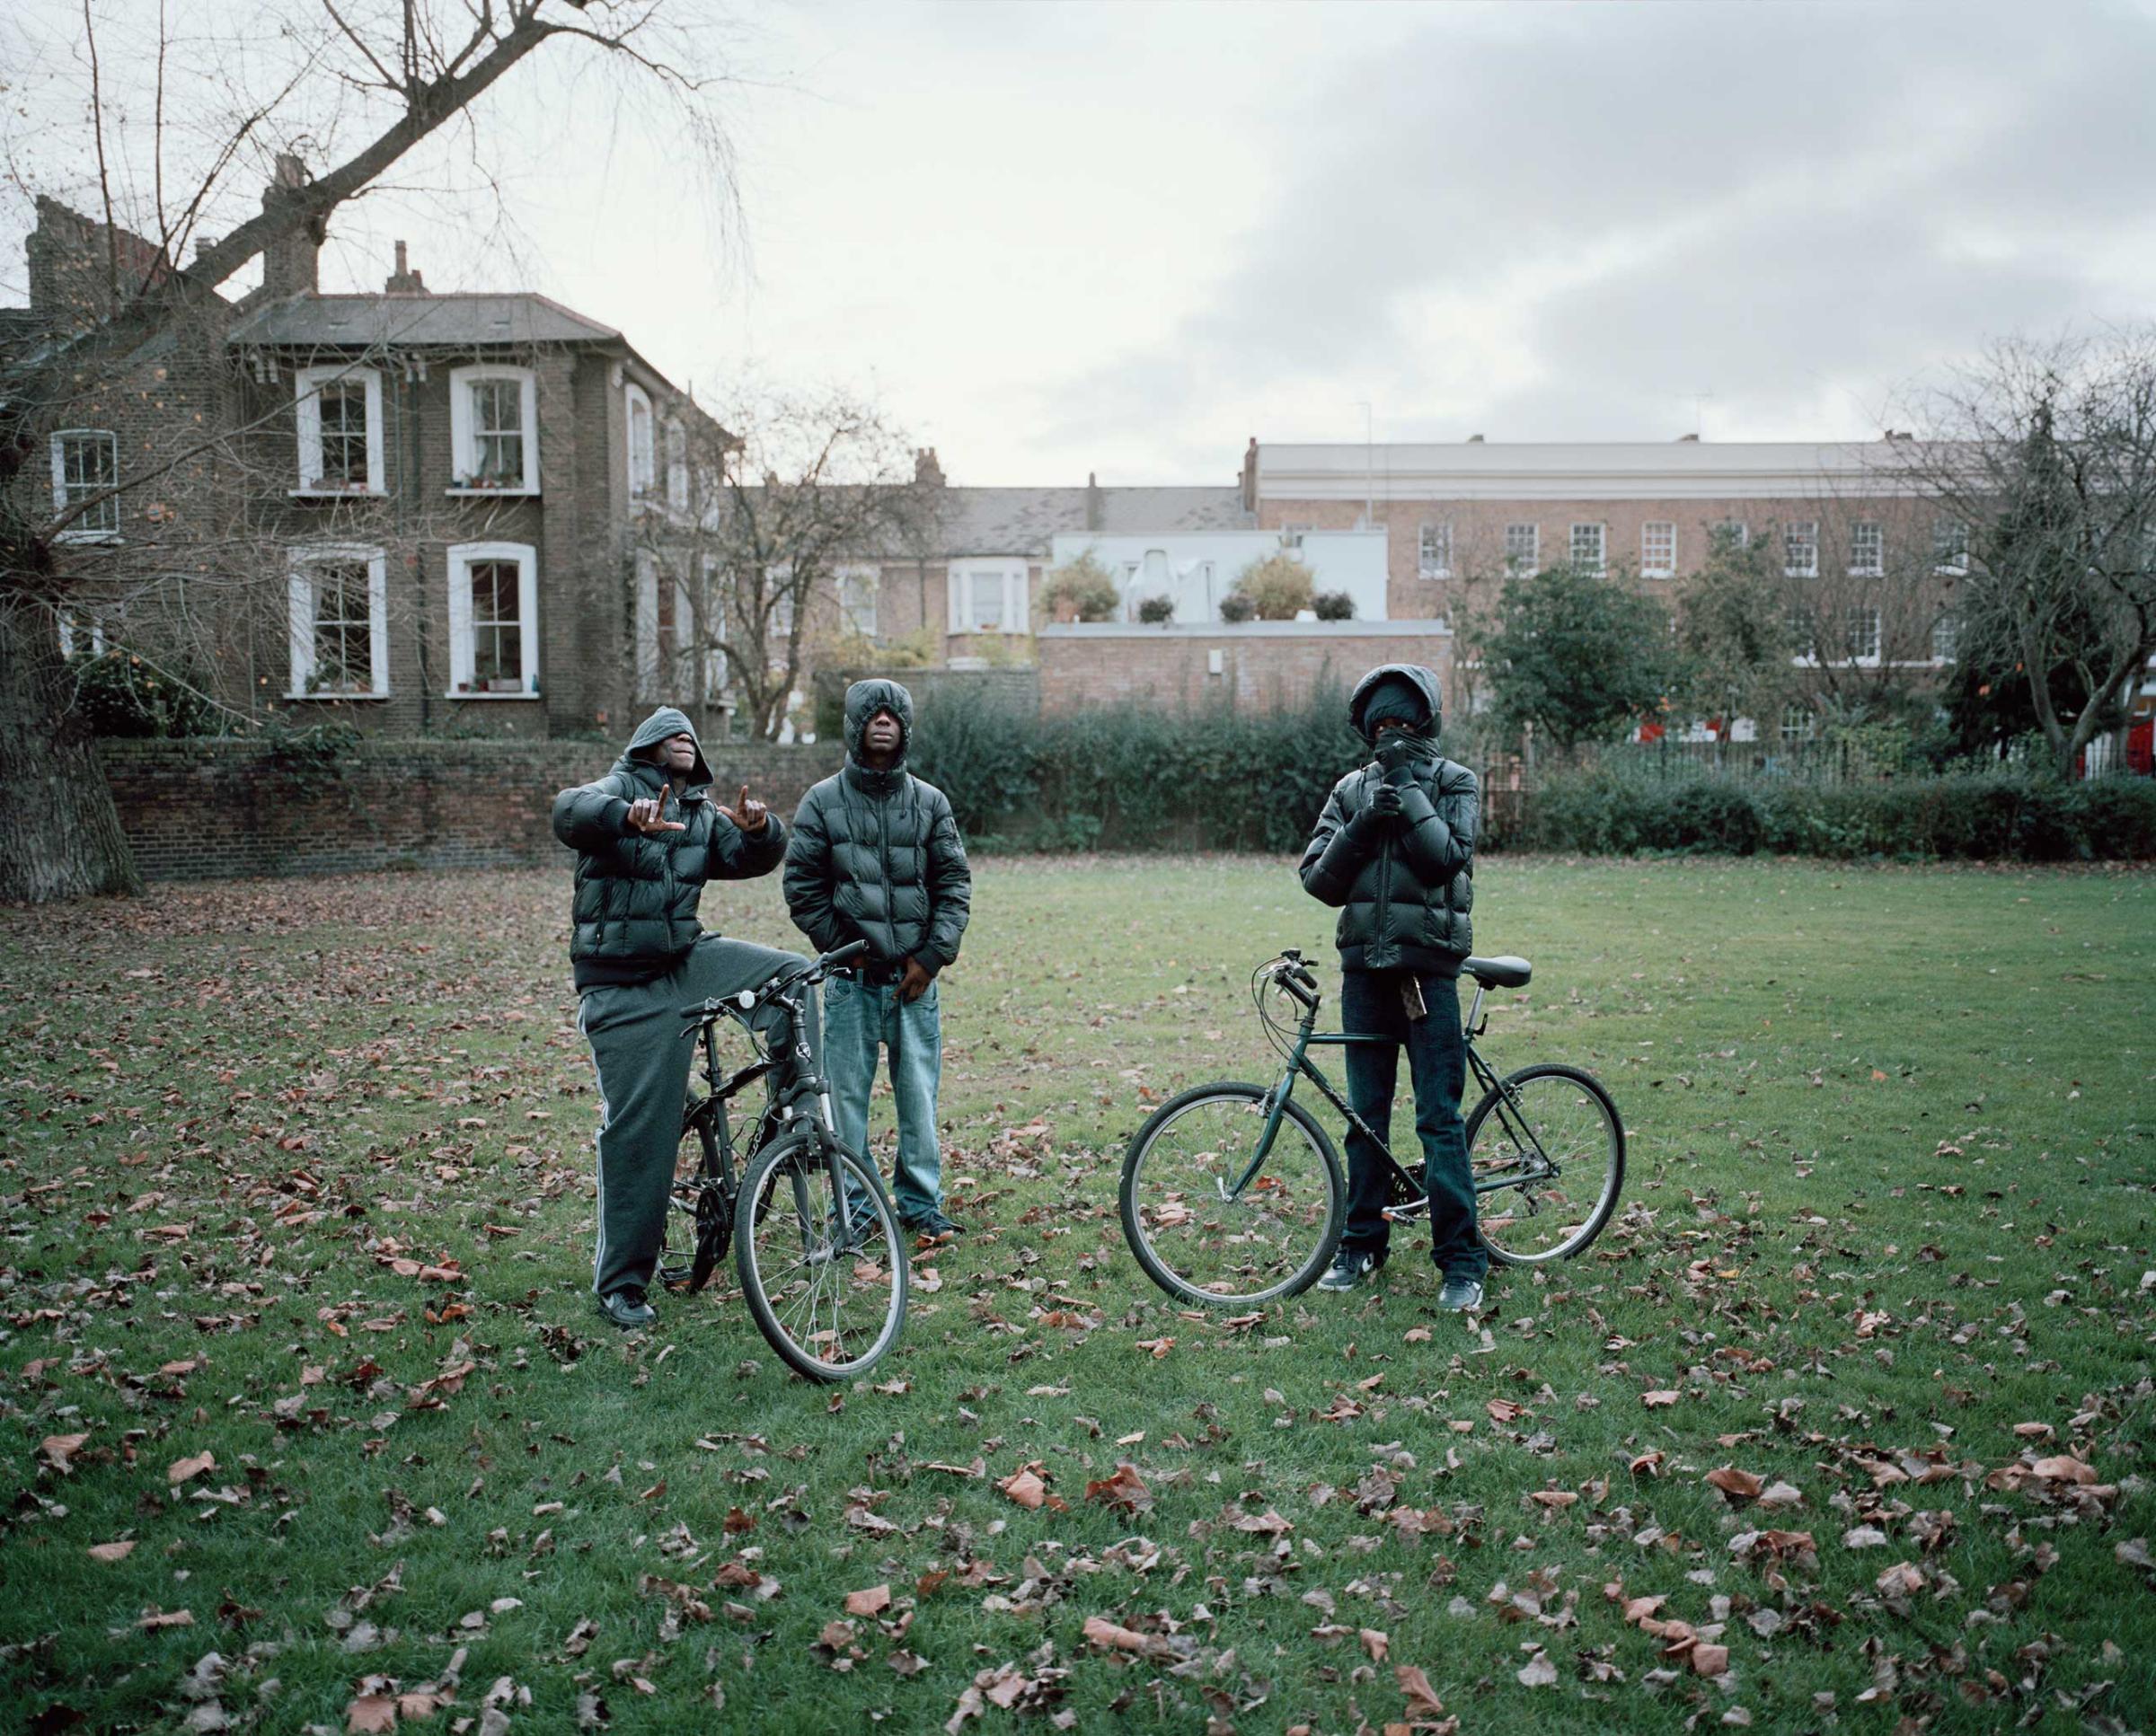 From the series: "Hackney - A Tale of Two Cities"